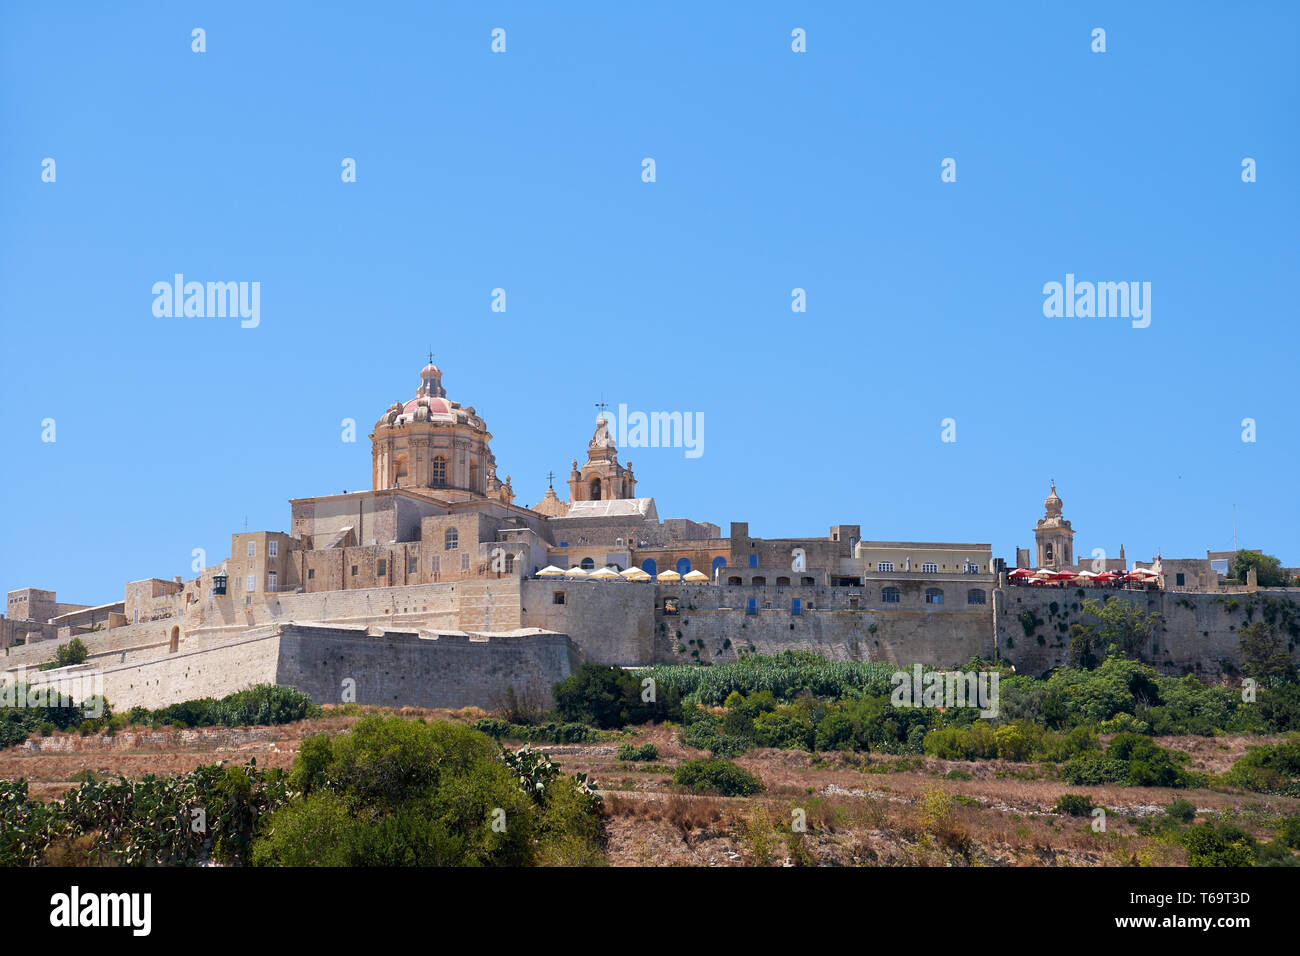 View of Mdina's St. Paul's Cathedral from the countryside below, Malta Stock Photo